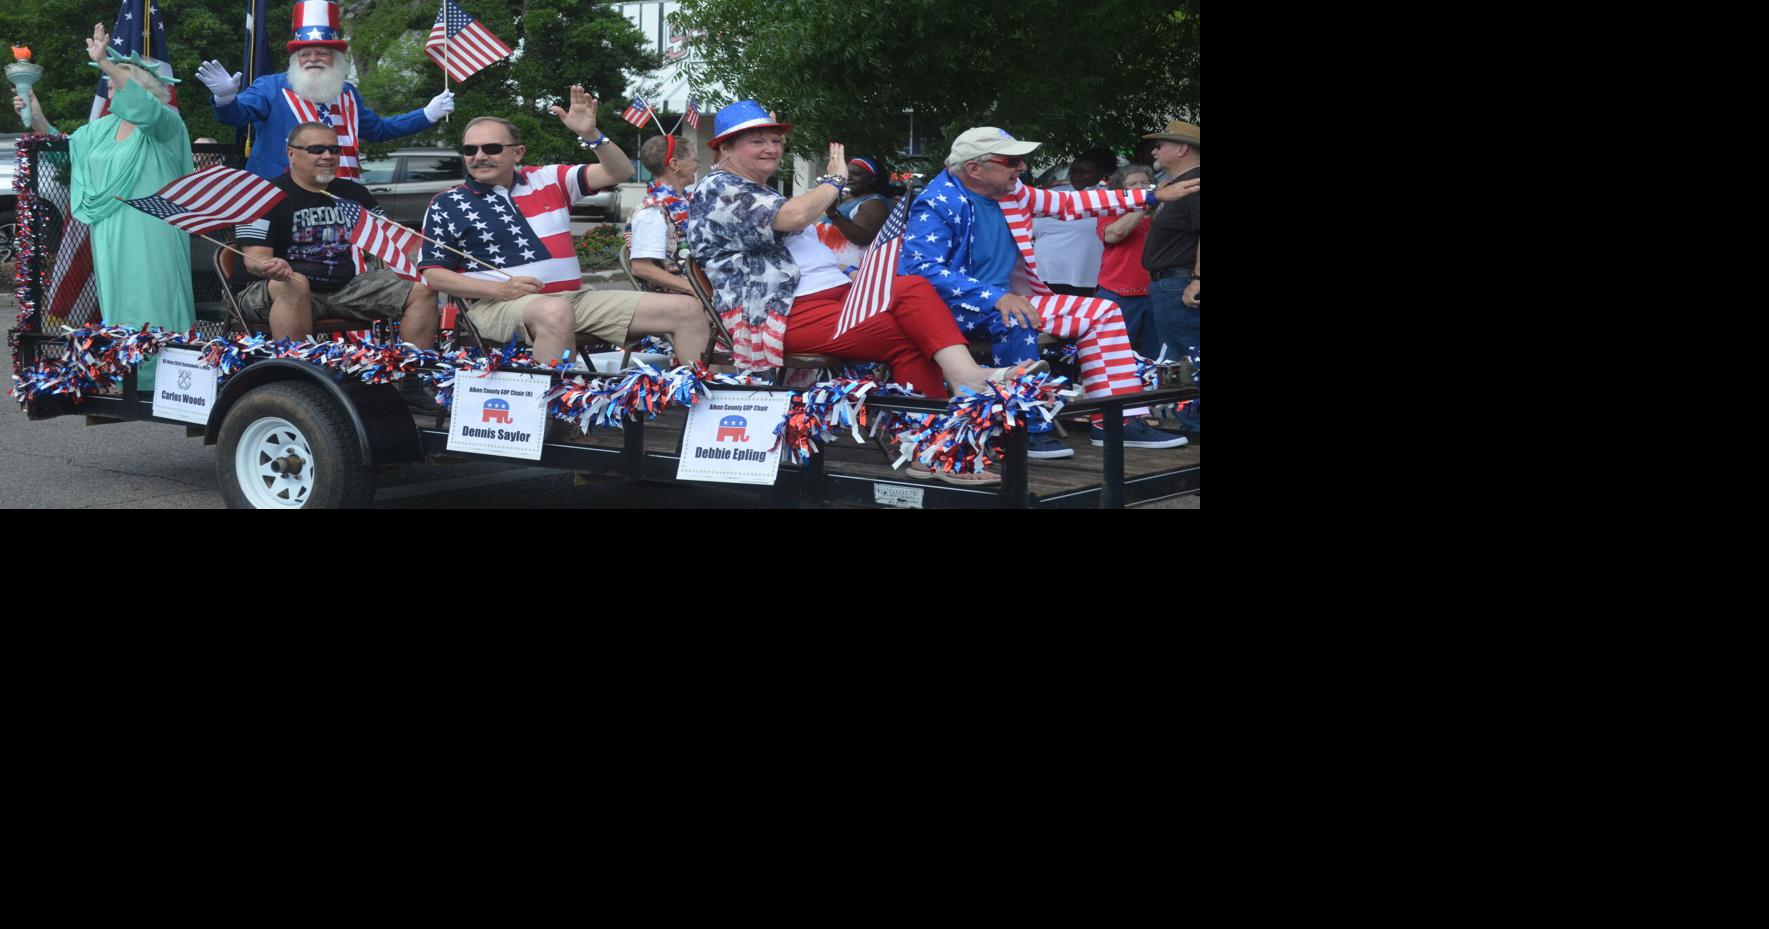 Hundreds pack downtown Aiken on Saturday for Memorial Day Parade